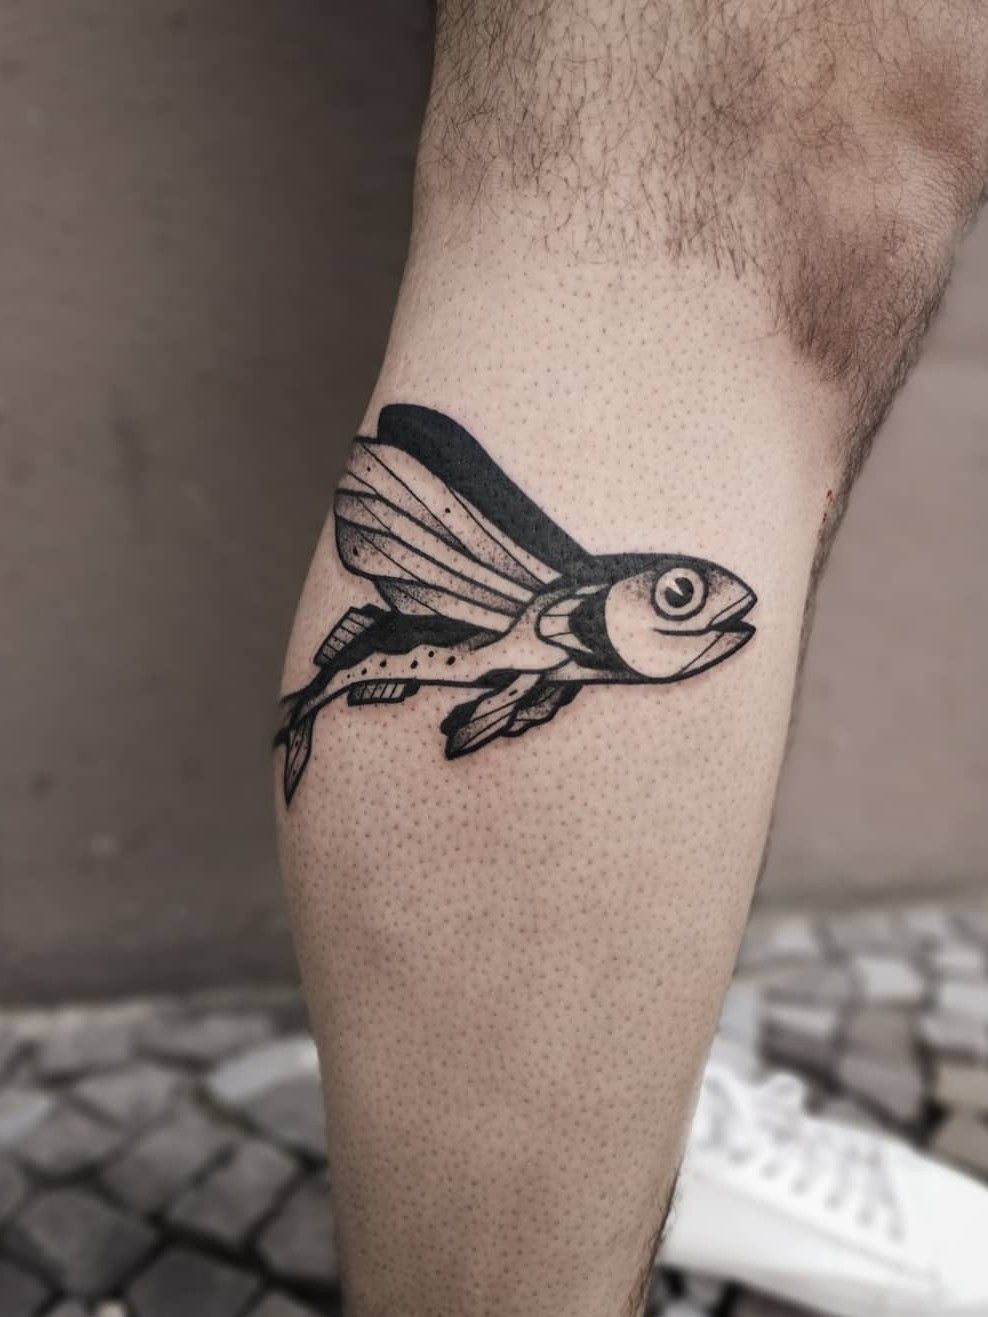 101 Awesome Fish Tattoo Ideas You Need To See!  Tattoos, Small fish tattoos,  Fly fishing tattoo